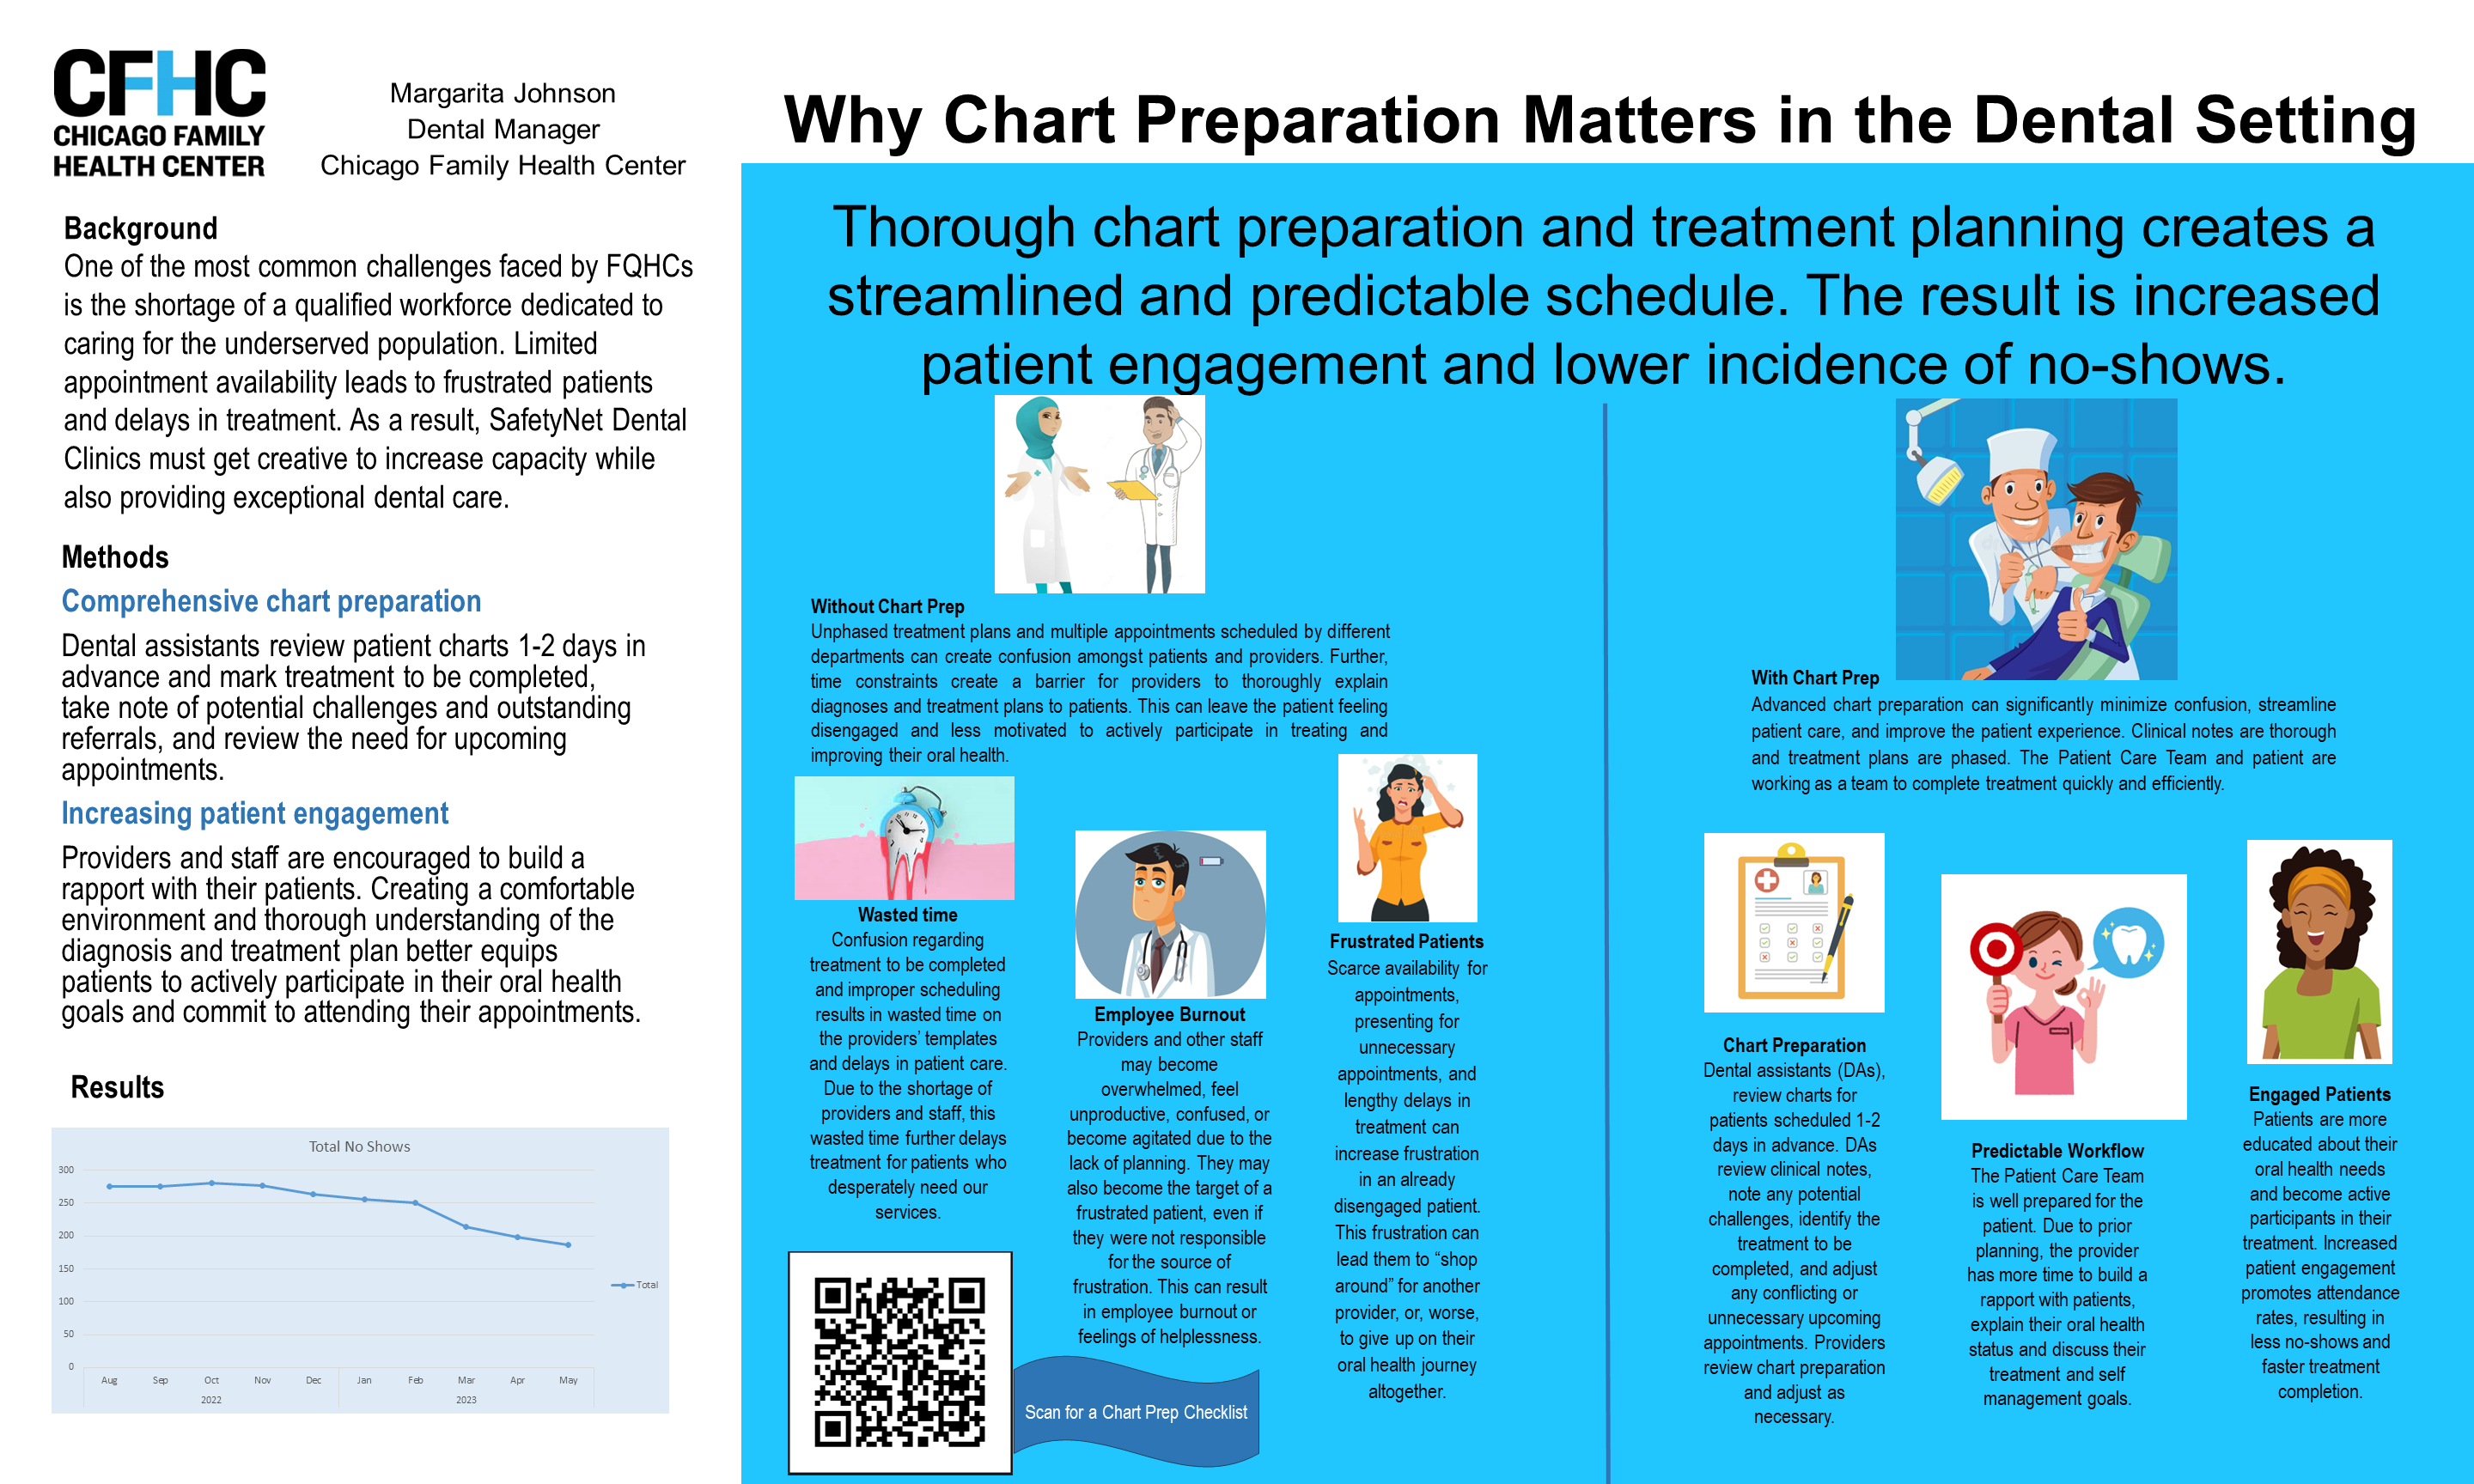 Uploaded - Chicago Family Health Center - Why Chart Preparation Matters